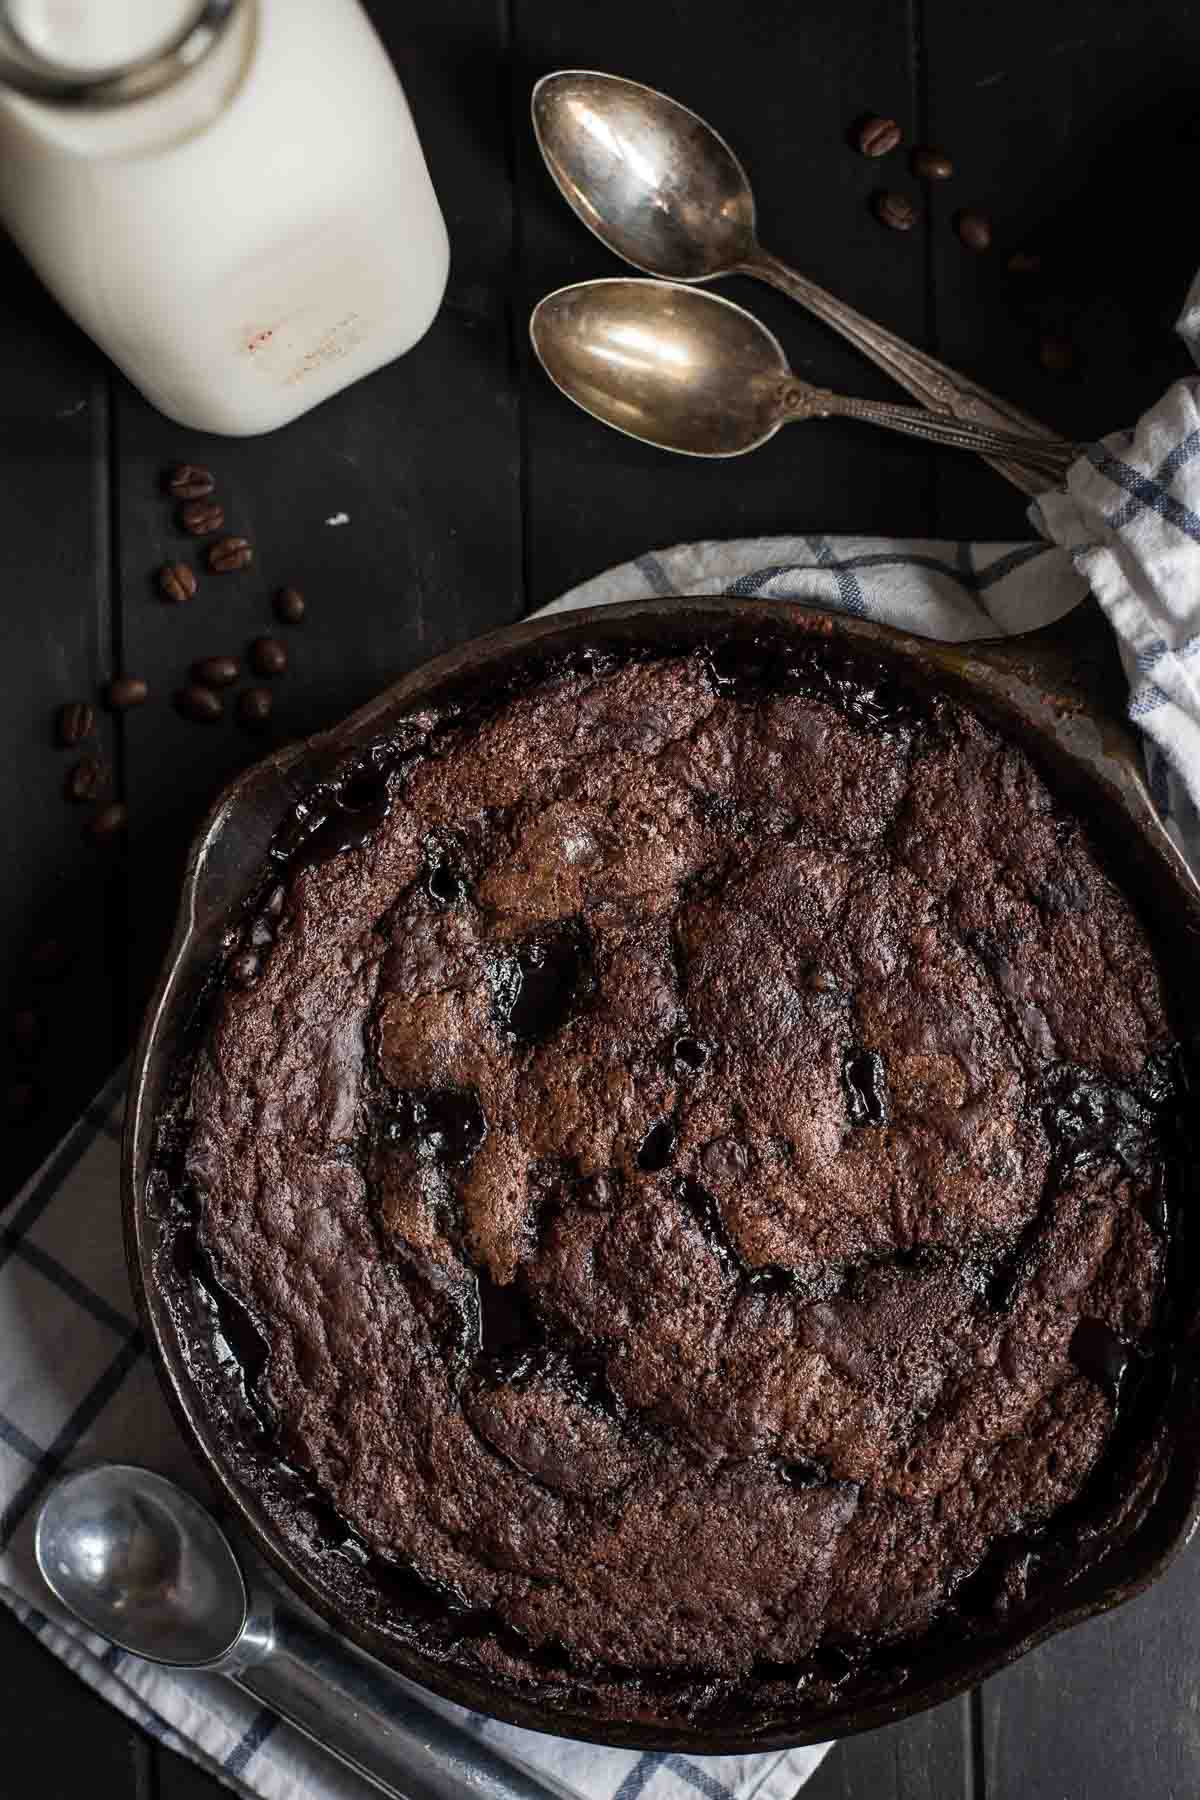 Need an easy recipe to get your chocolate fix? This Mocha Chocolate Cobbler is the one for you!